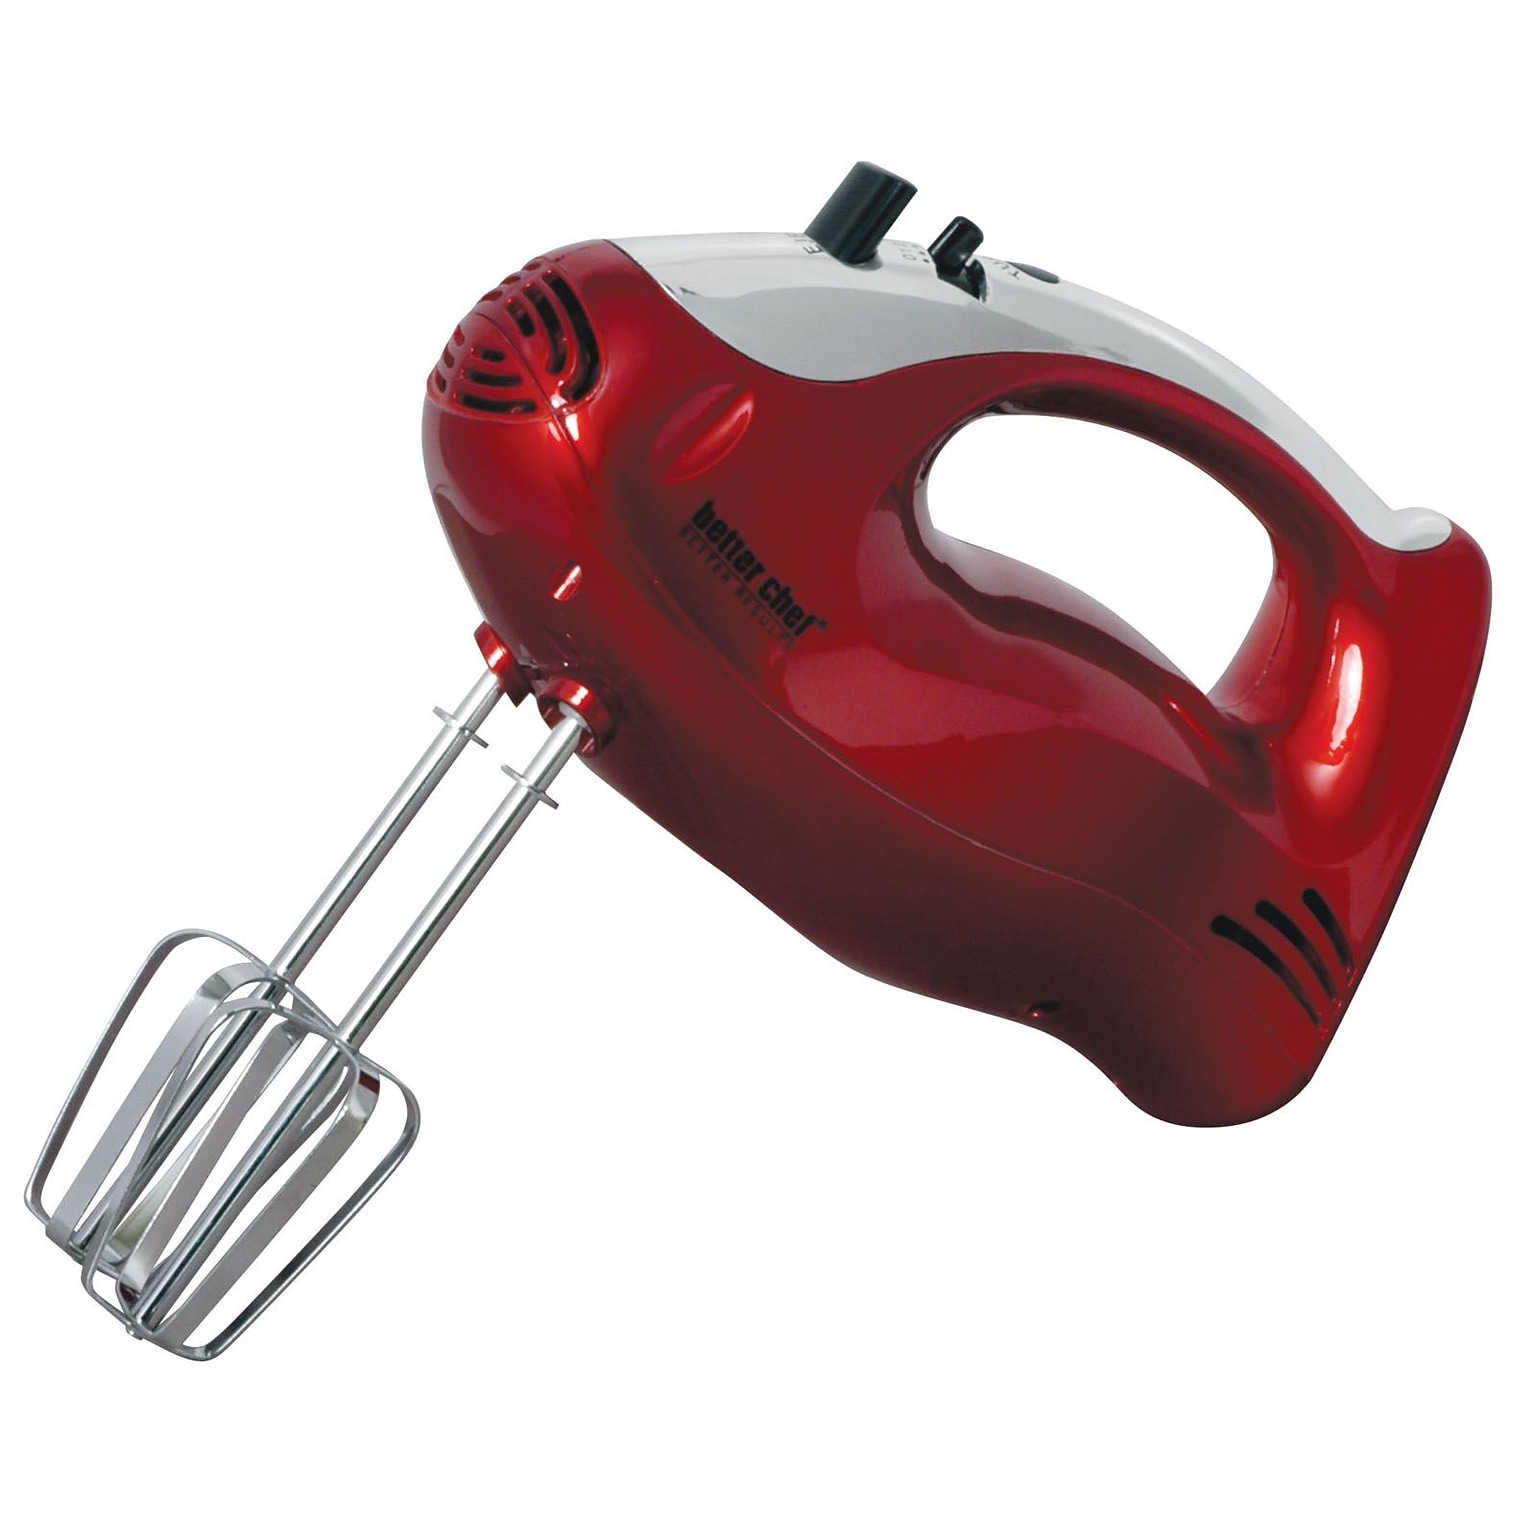 Better Chef® 2-Speed Hand Mixer; Red